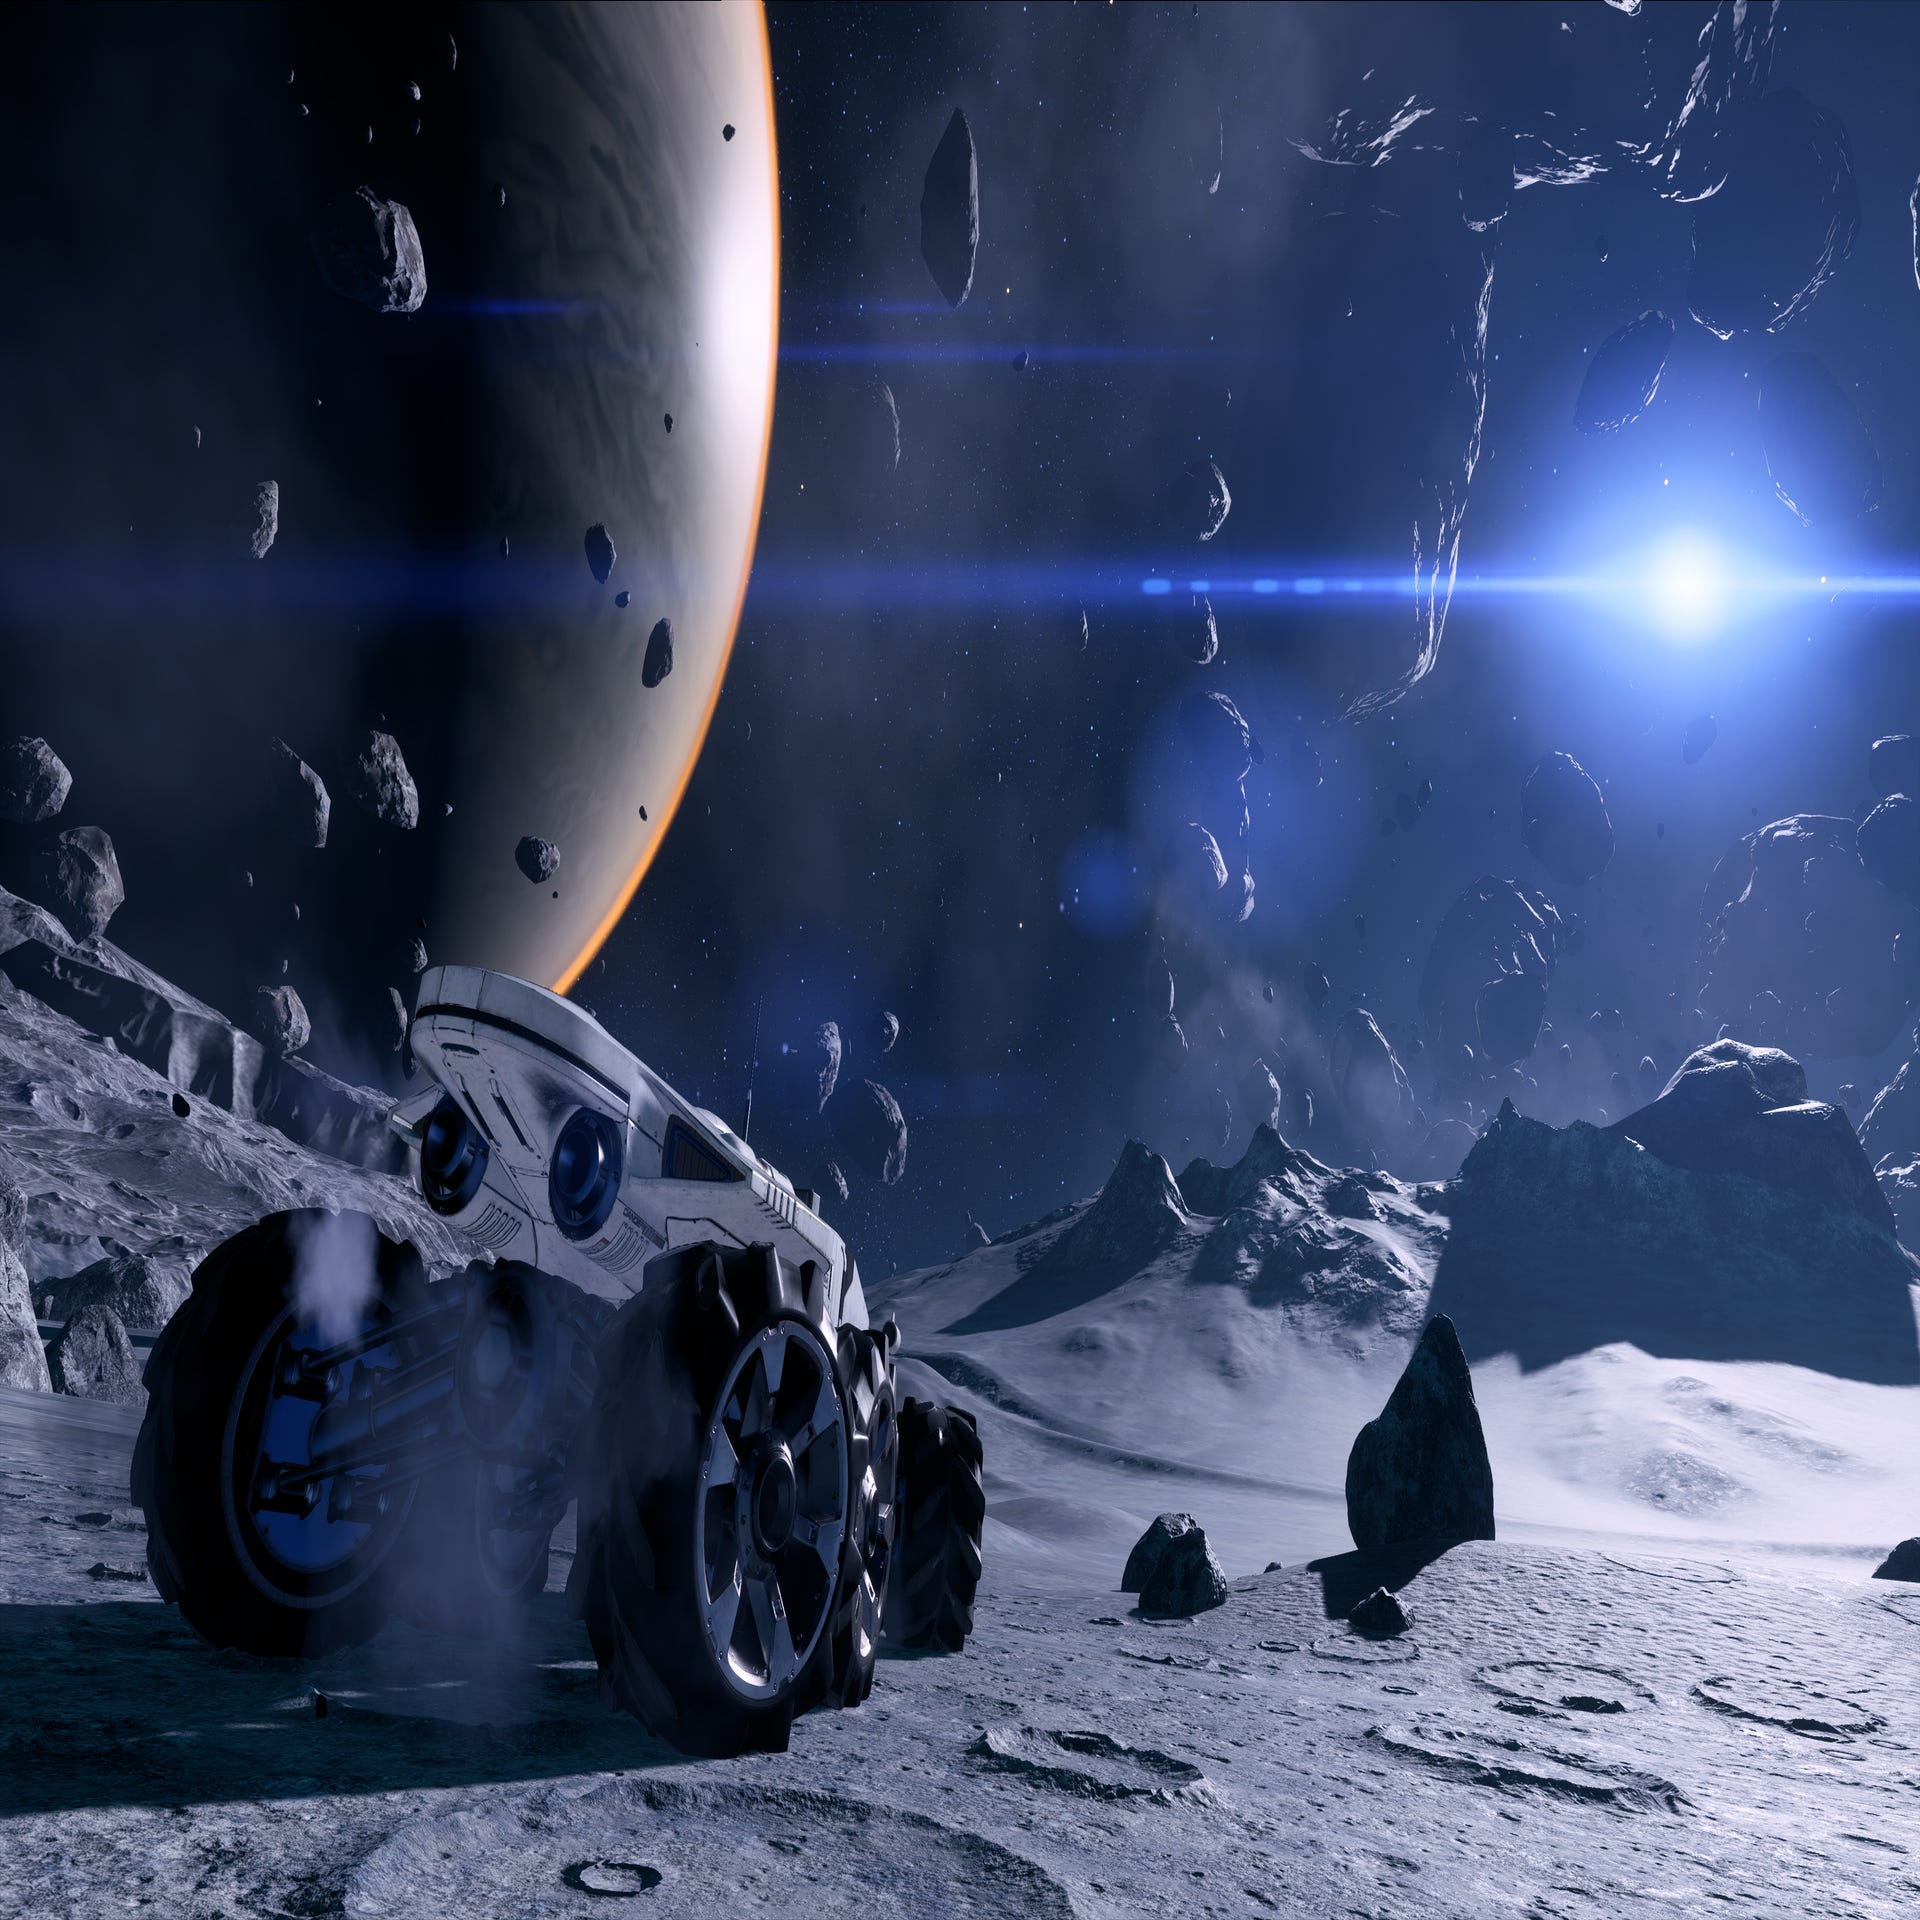 Enormous Gorgeous Mass Effect Andromeda 4k Screens For The Pc Crowd Plus A Look At The 6709